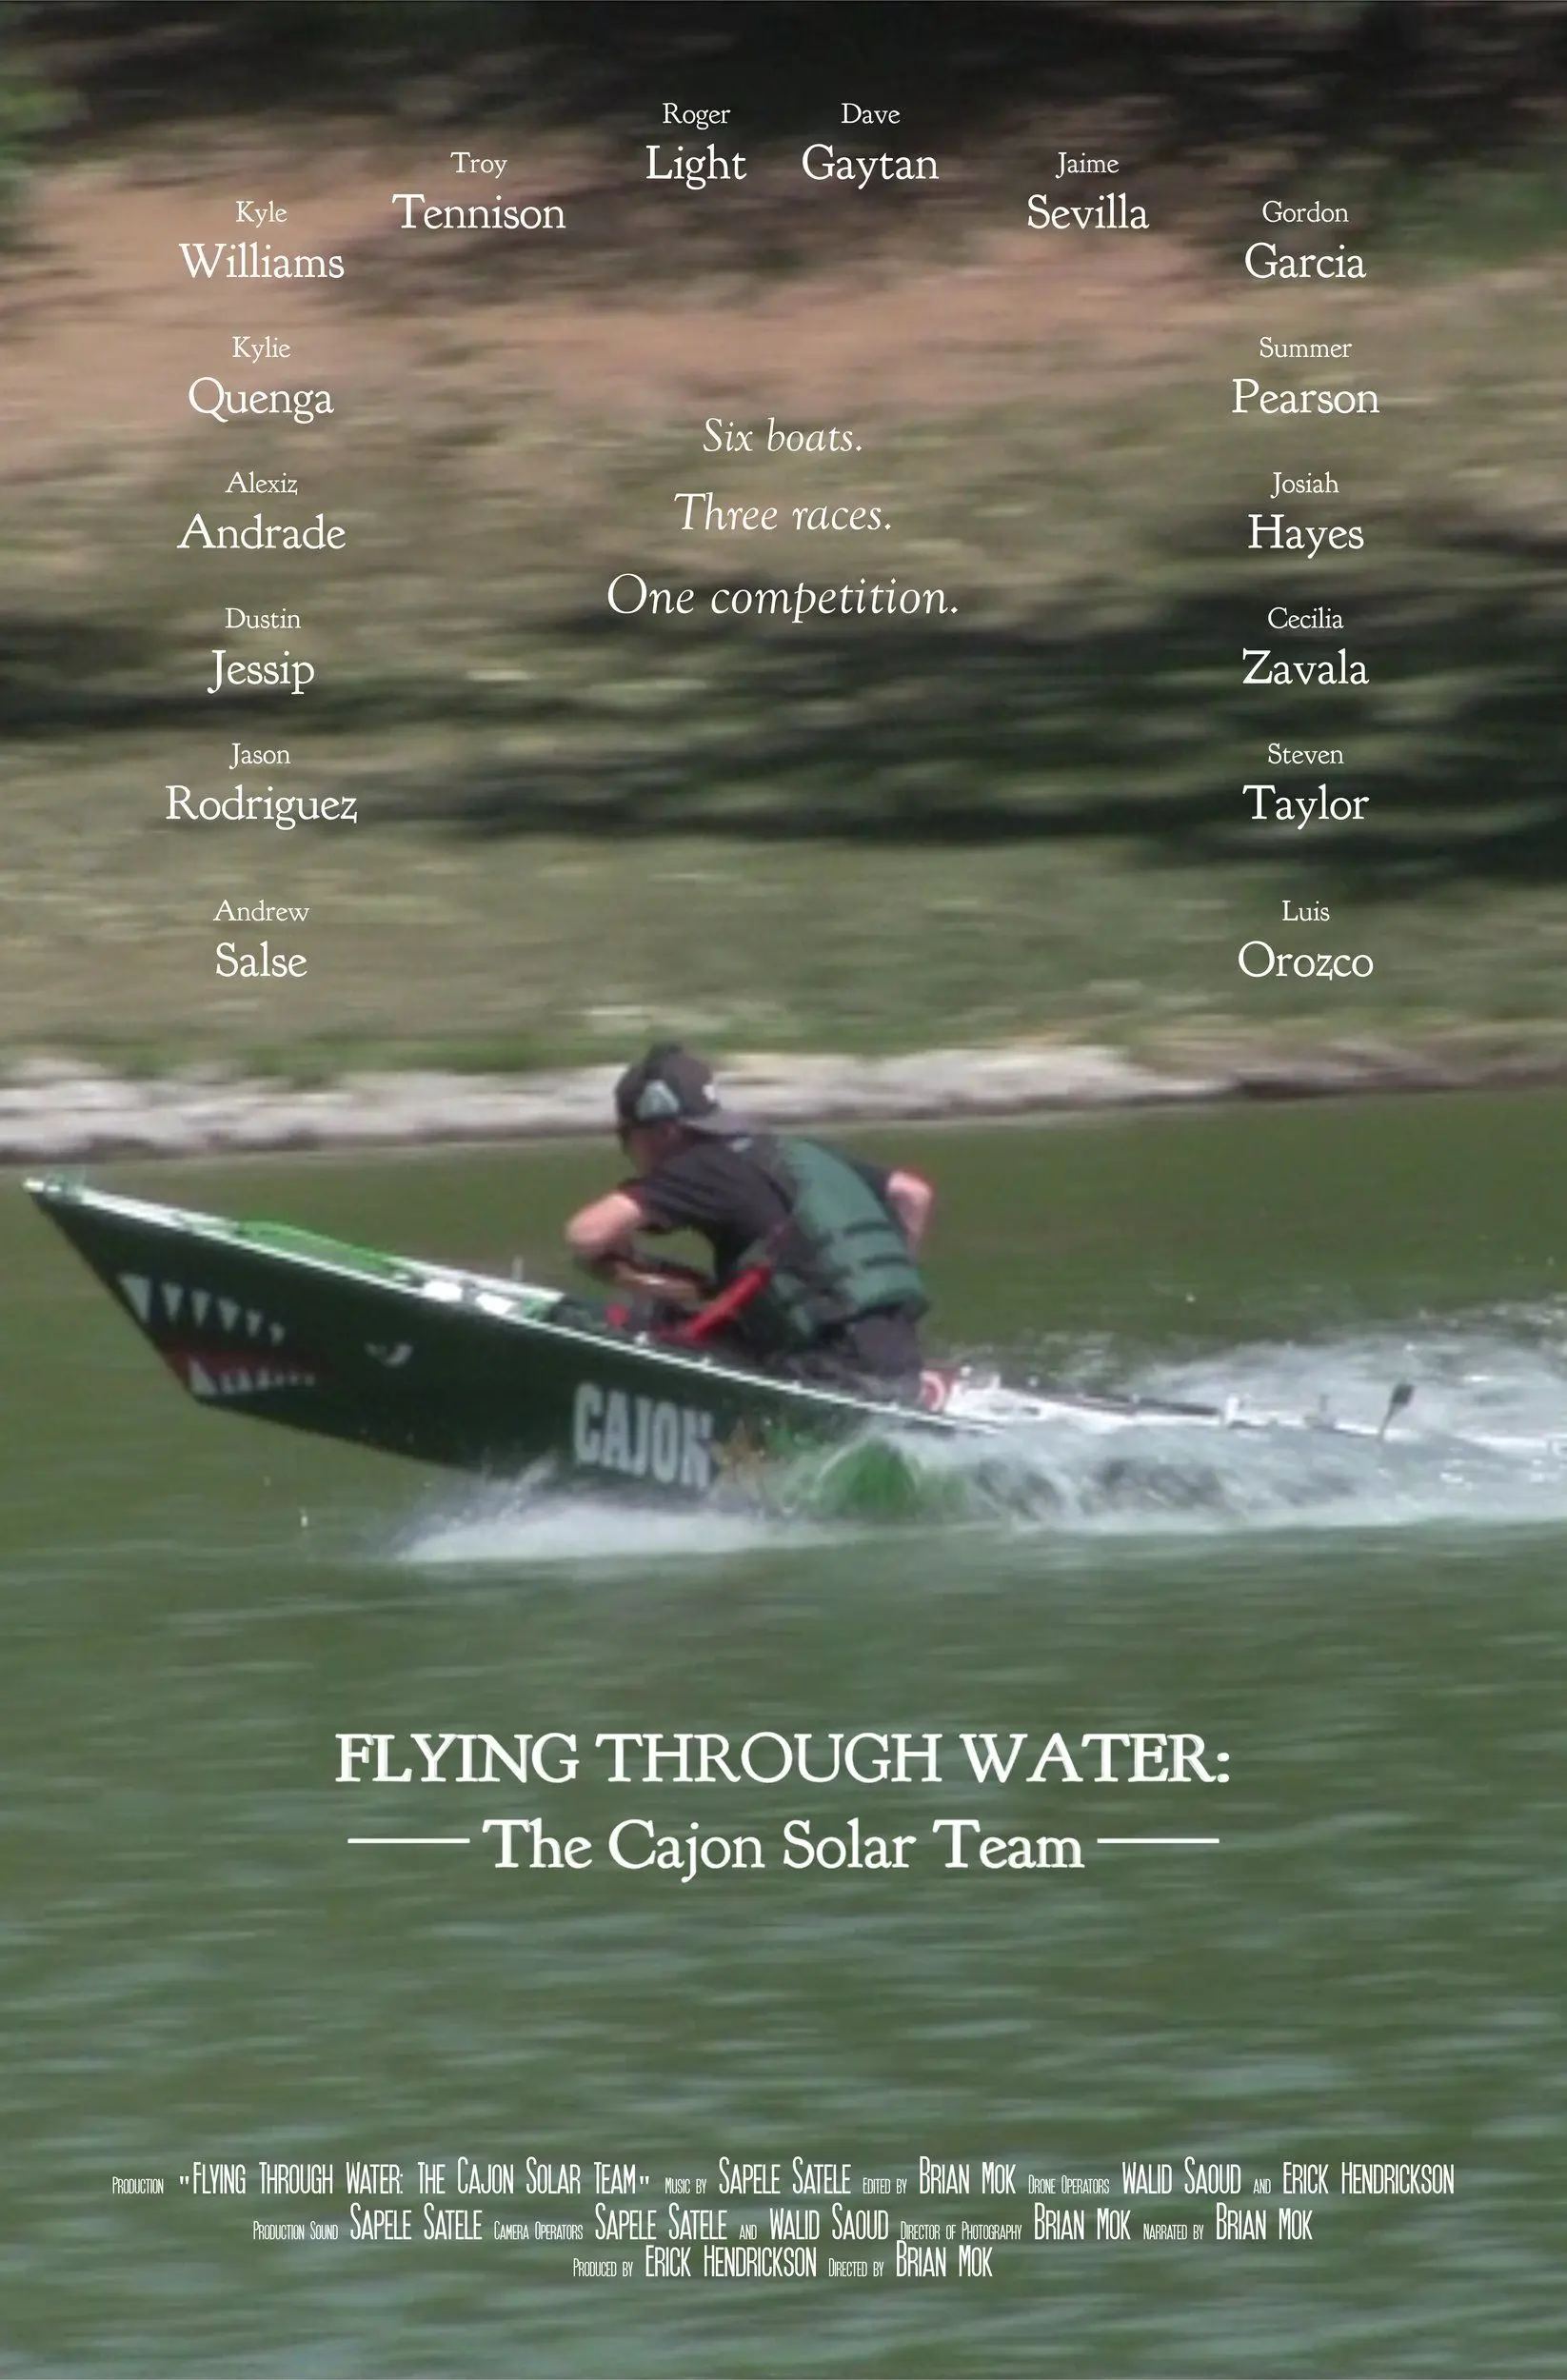 "Flying Through Water: The Cajon Solar Team" film poster. A racer flies through the water in a student-built speed boat.